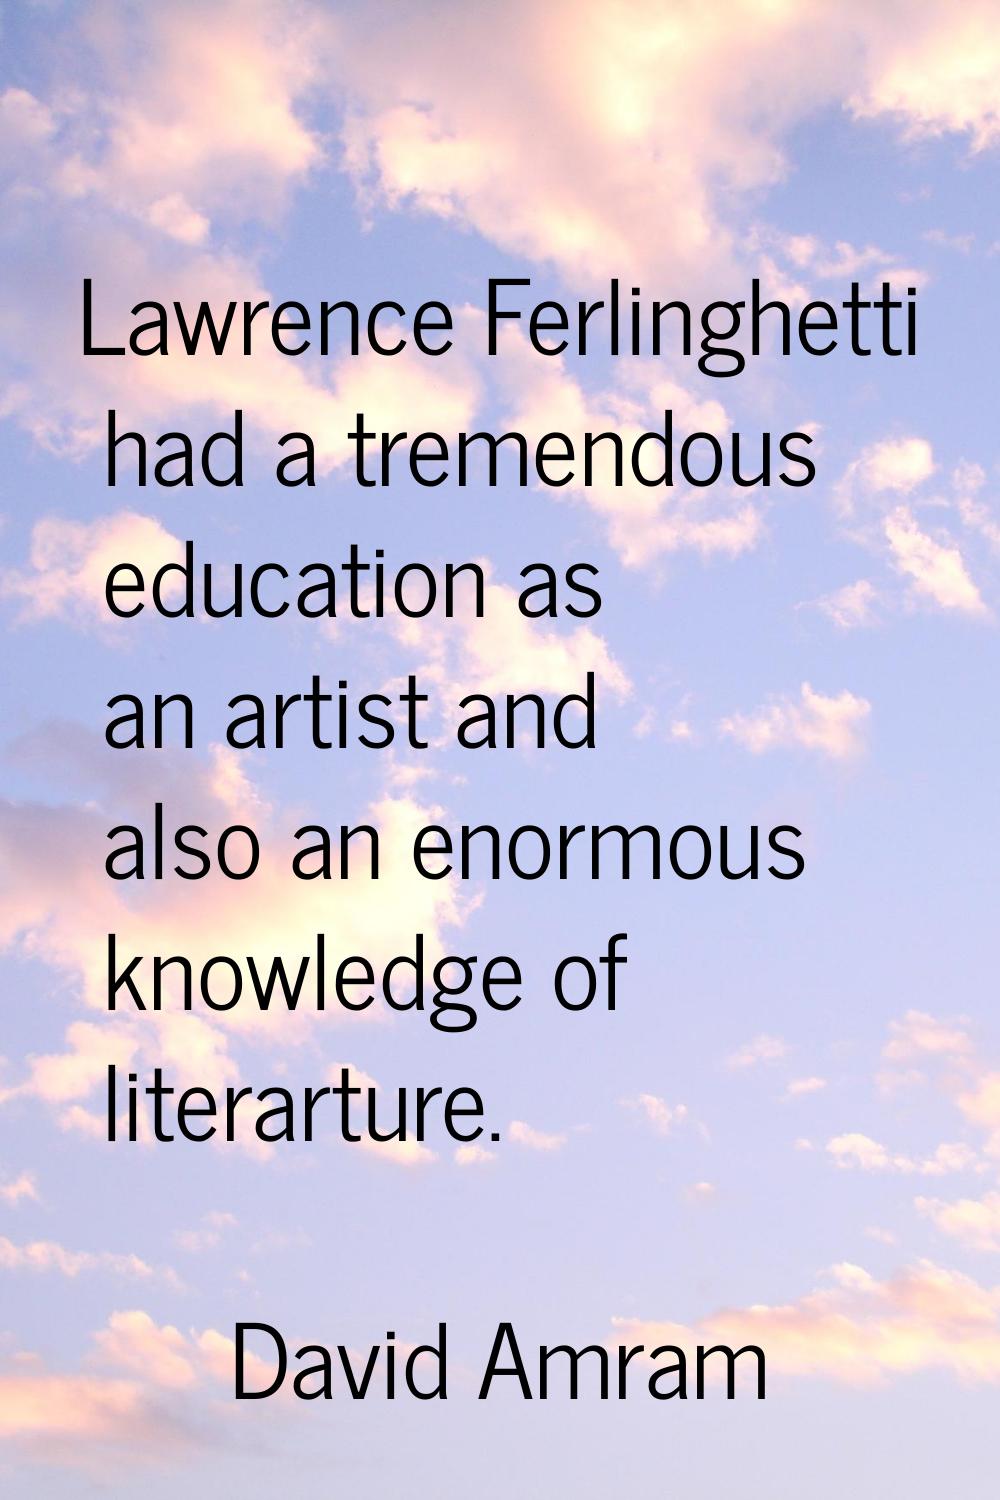 Lawrence Ferlinghetti had a tremendous education as an artist and also an enormous knowledge of lit